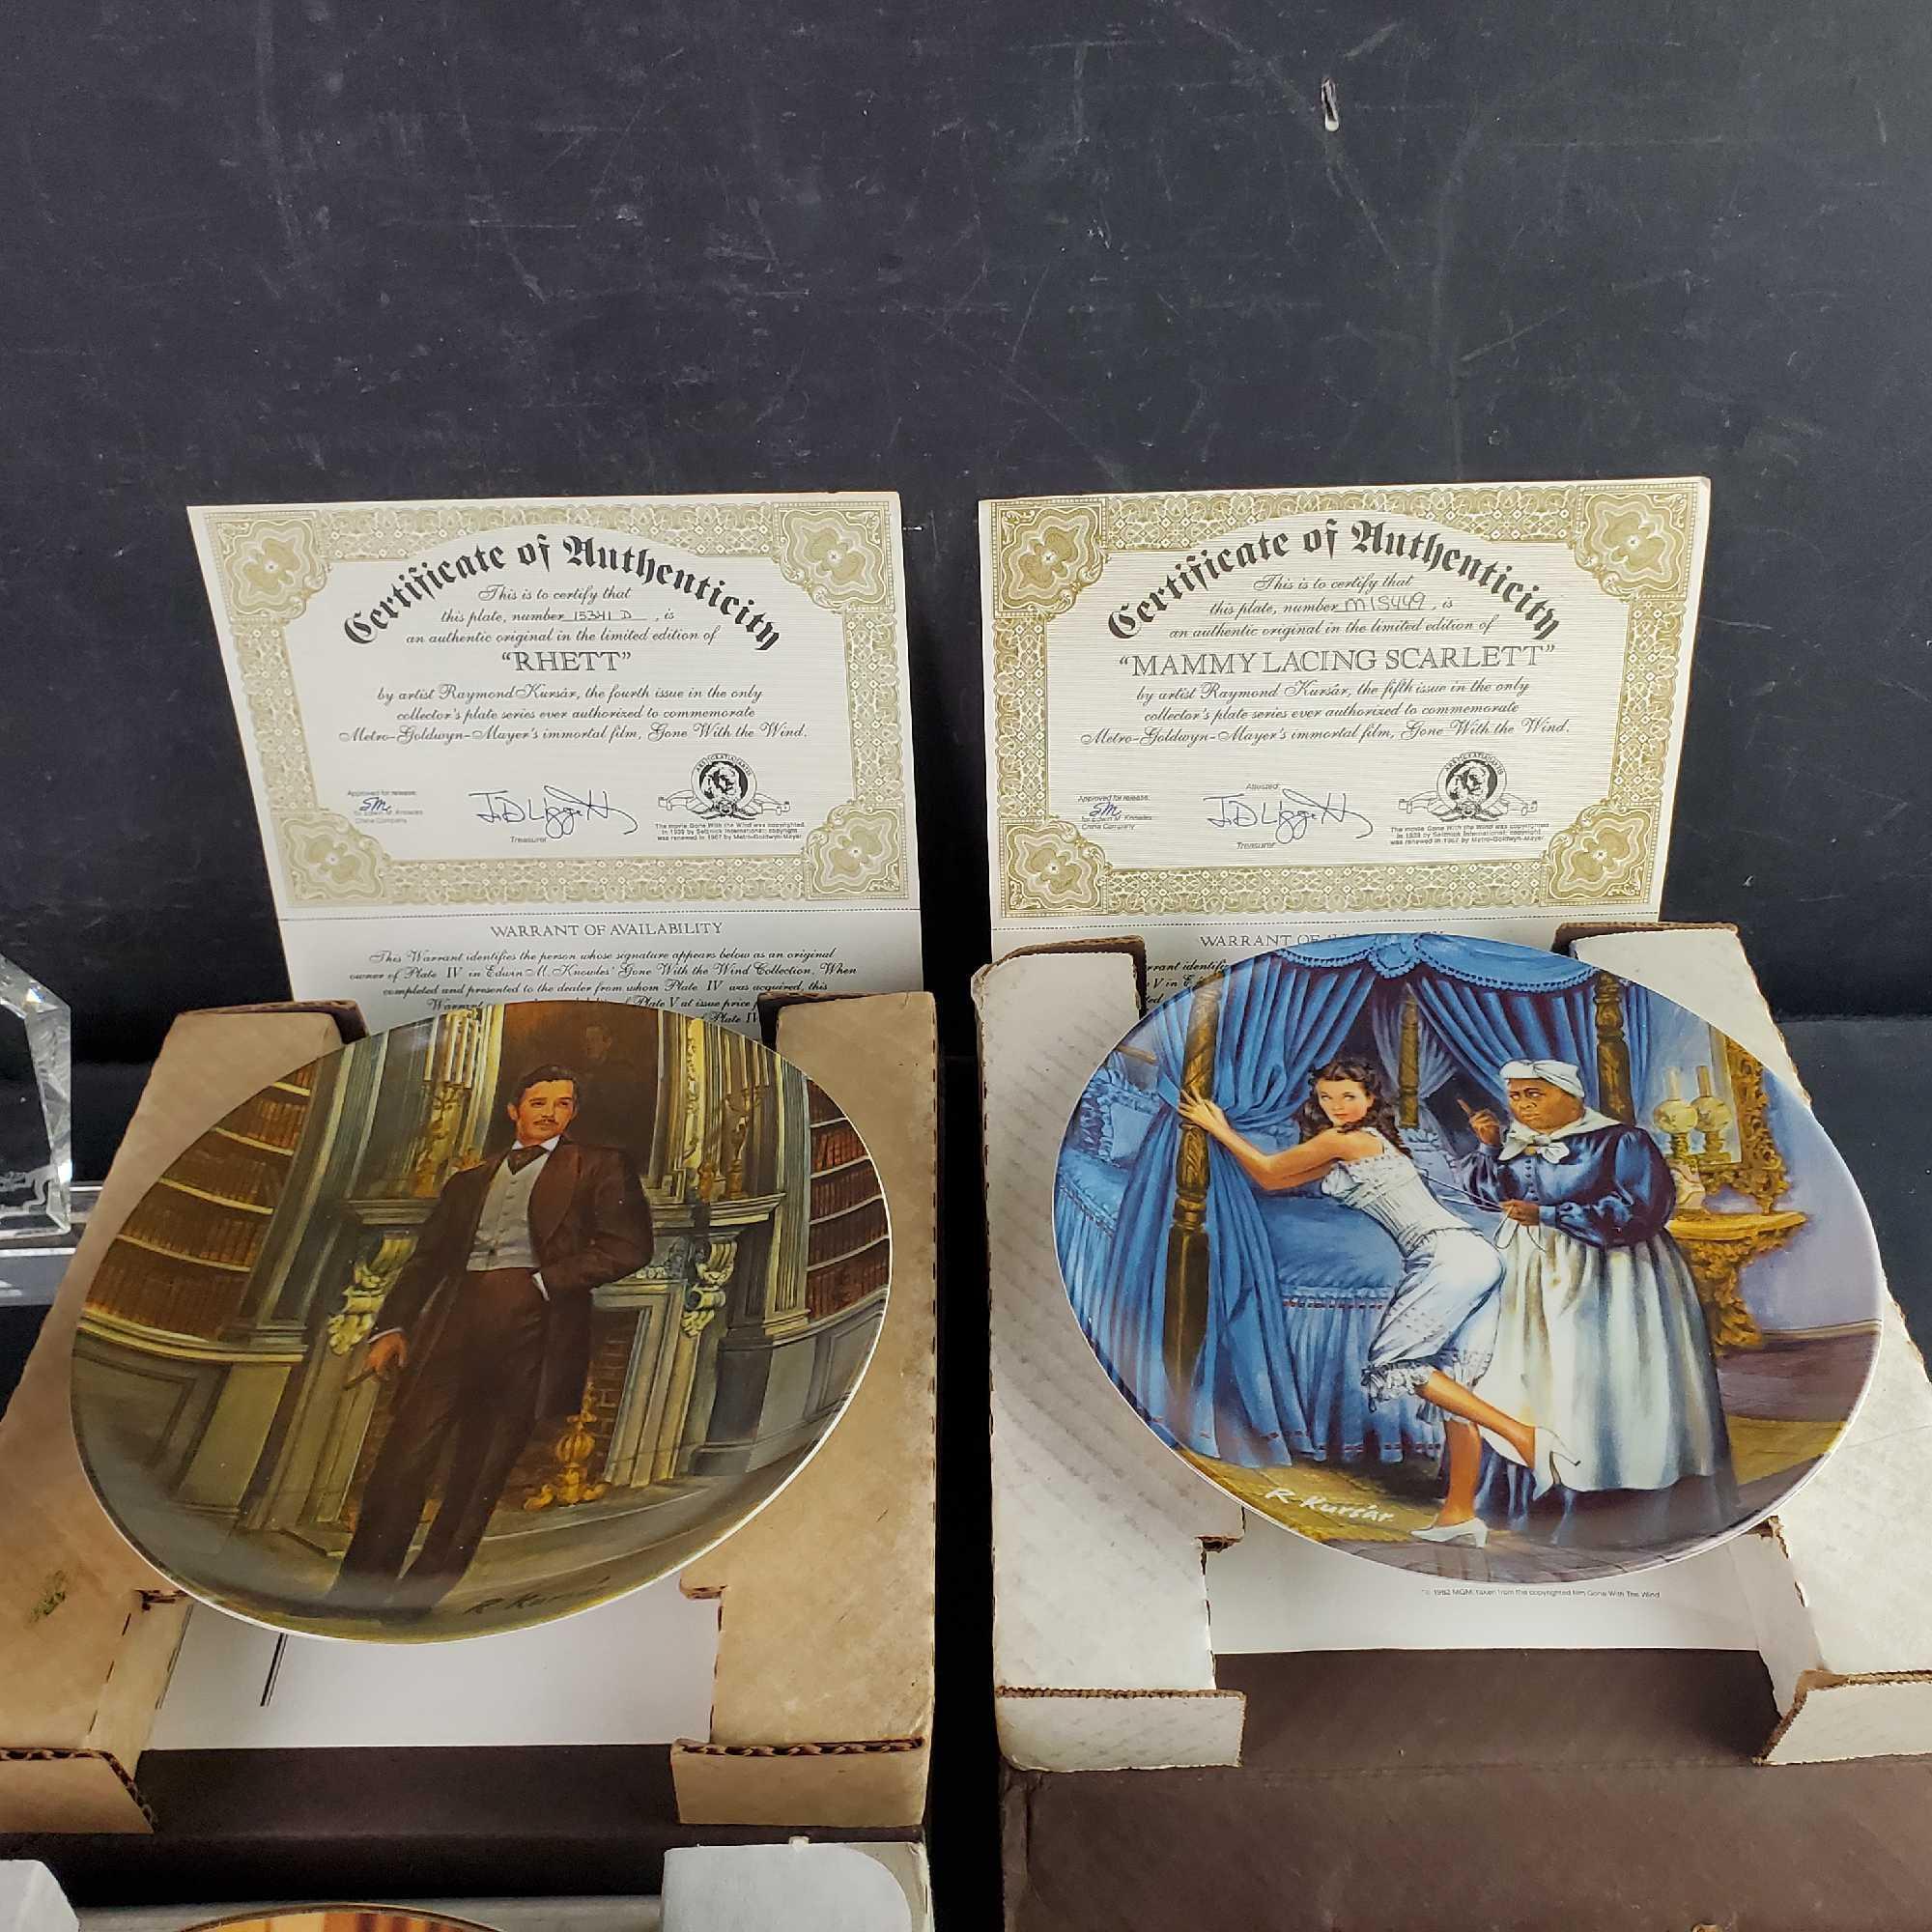 Lot 4 collectors plates W/COA acrylic eagle display 4 glass paperweights small berkley jewelry box